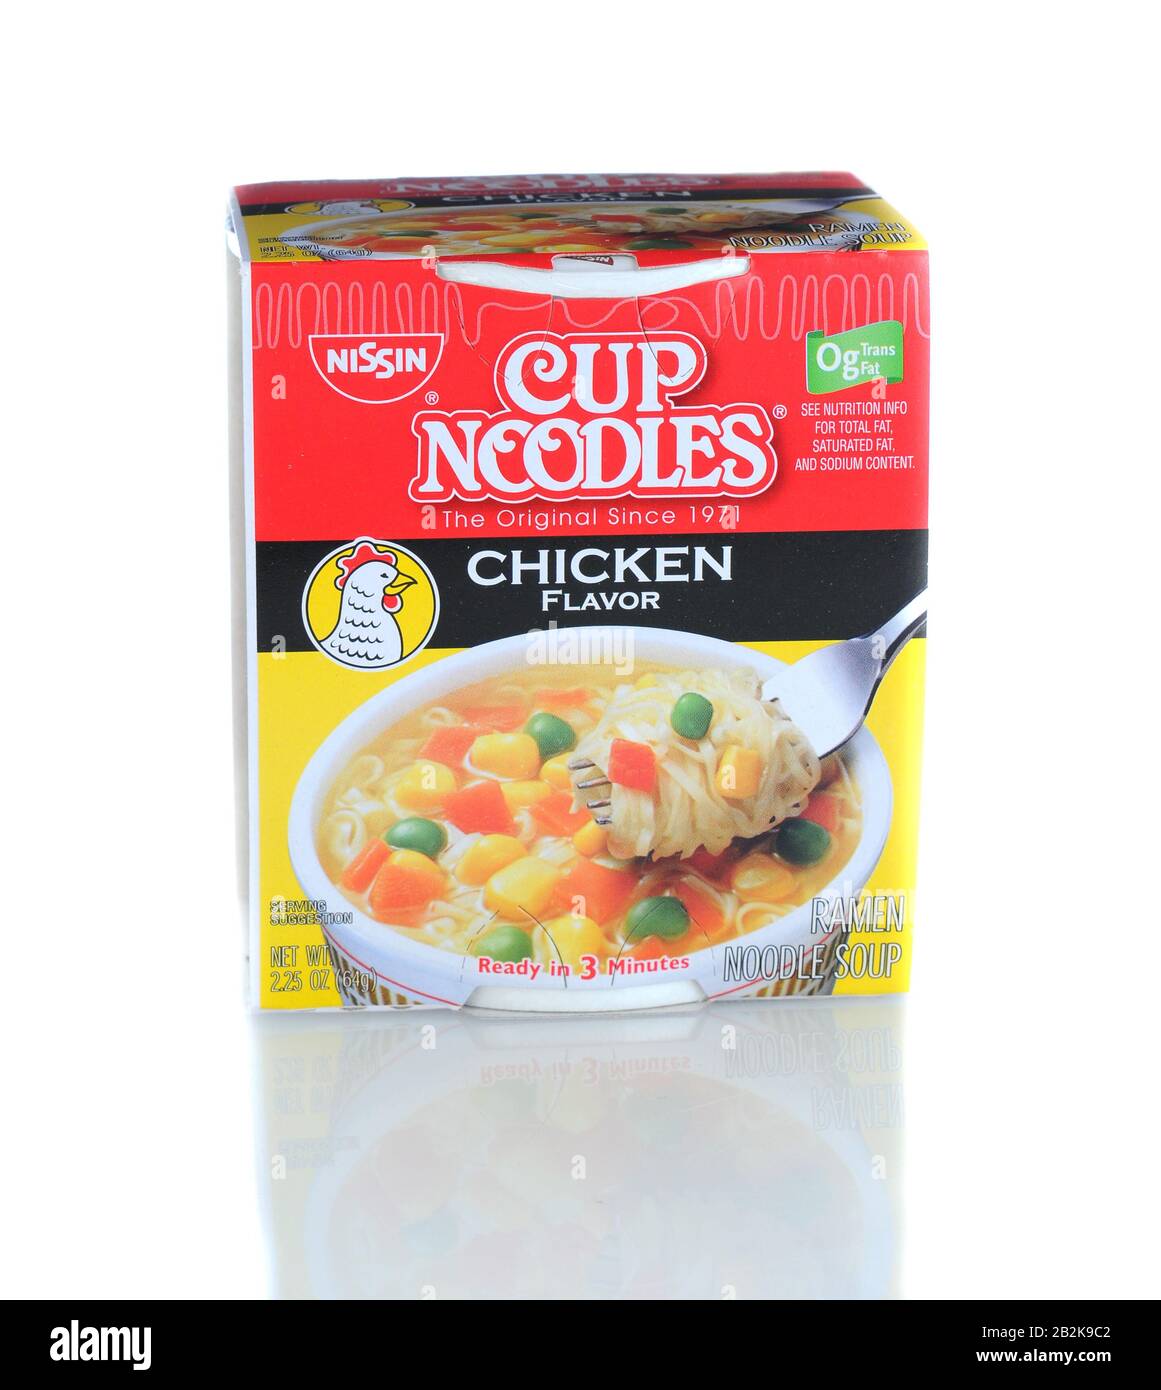 IRVINE, CA - January 21, 2013: A 2.5 ounce package of Cup Noodles Chicken Flavor. Manufactured by Nissin Foods, Cup Noodles has been a favorite ramen Stock Photo